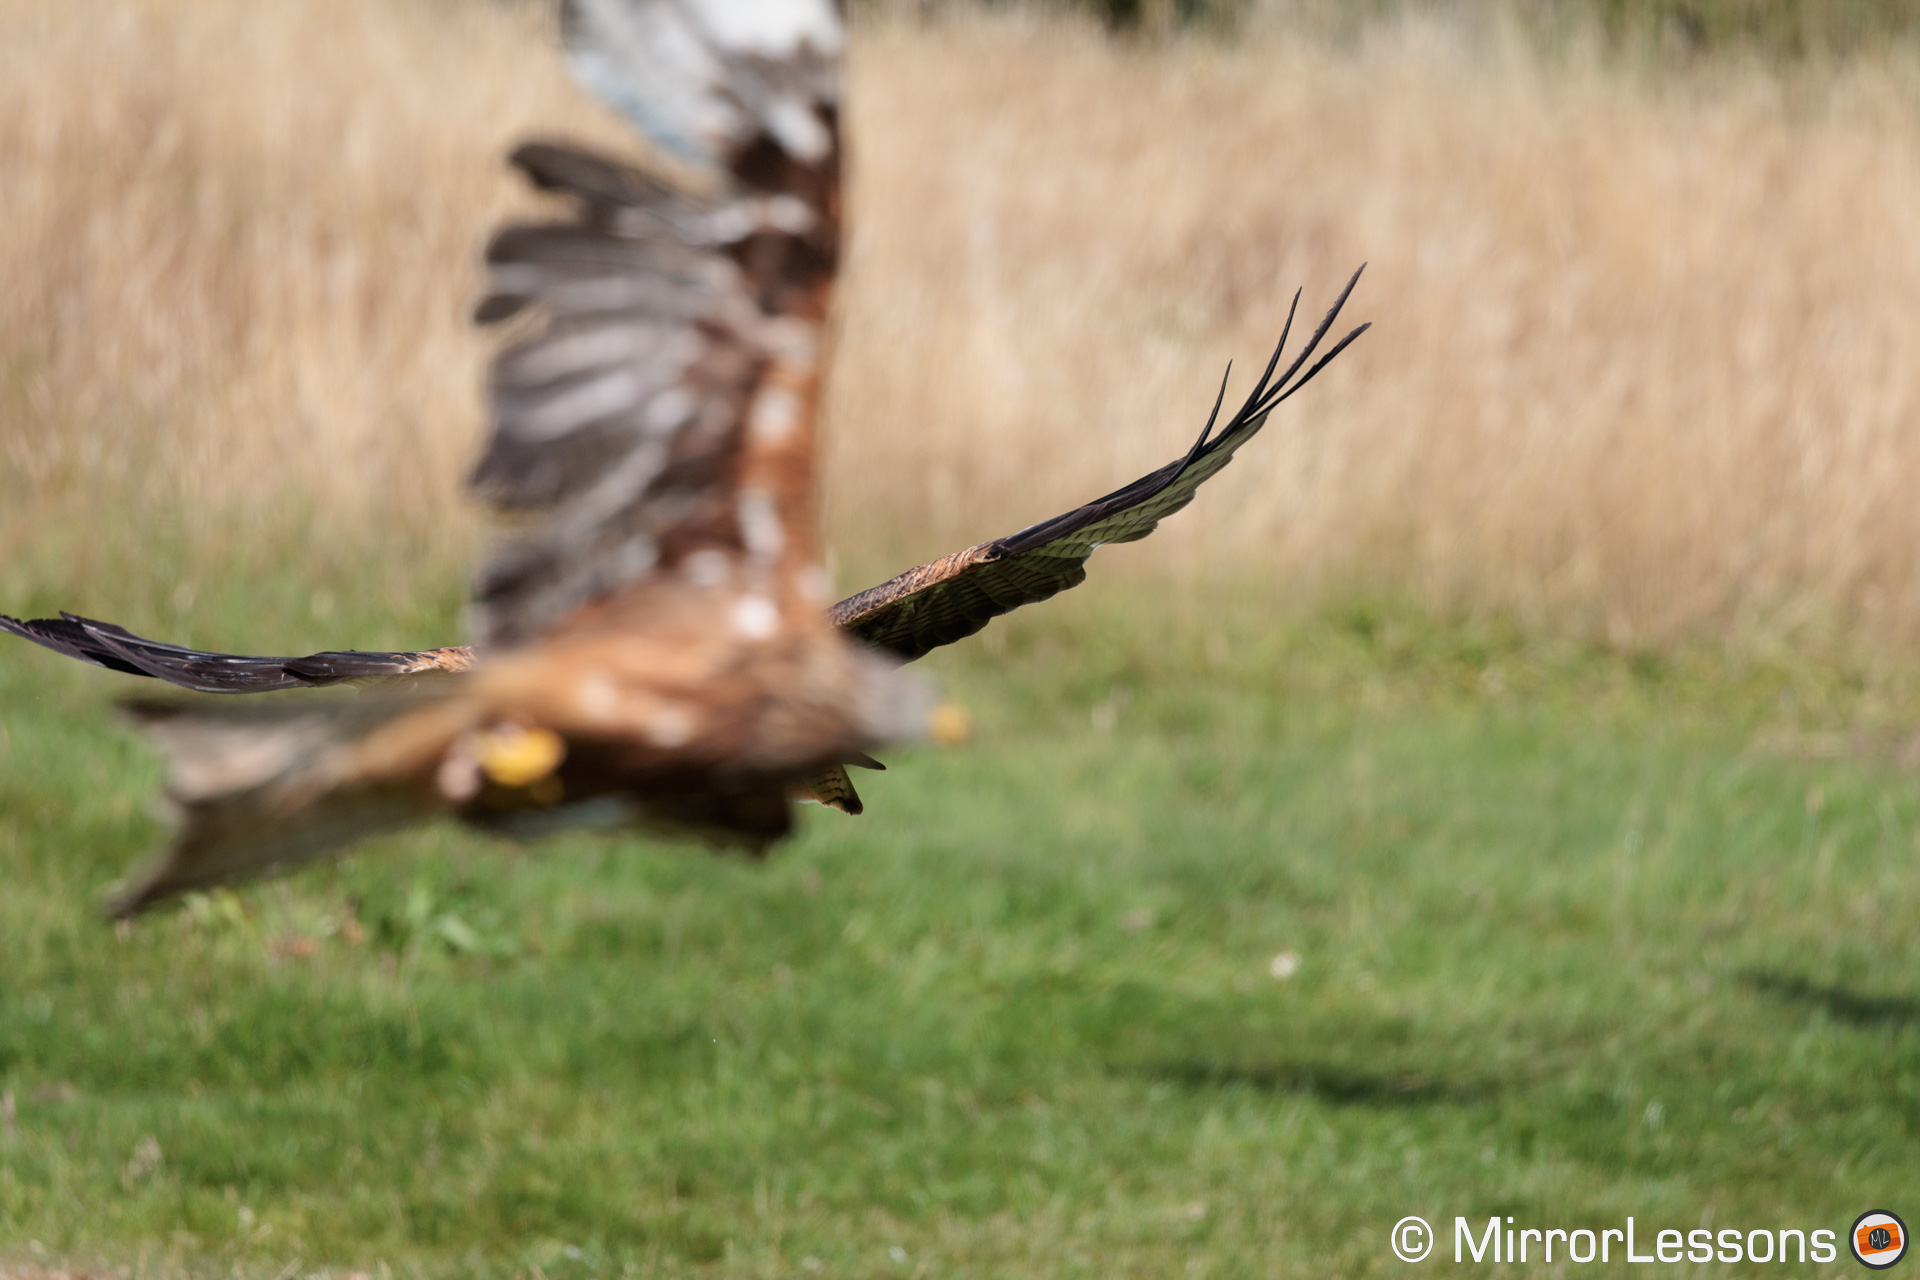 Red kite covered by another bird flying in front of him.